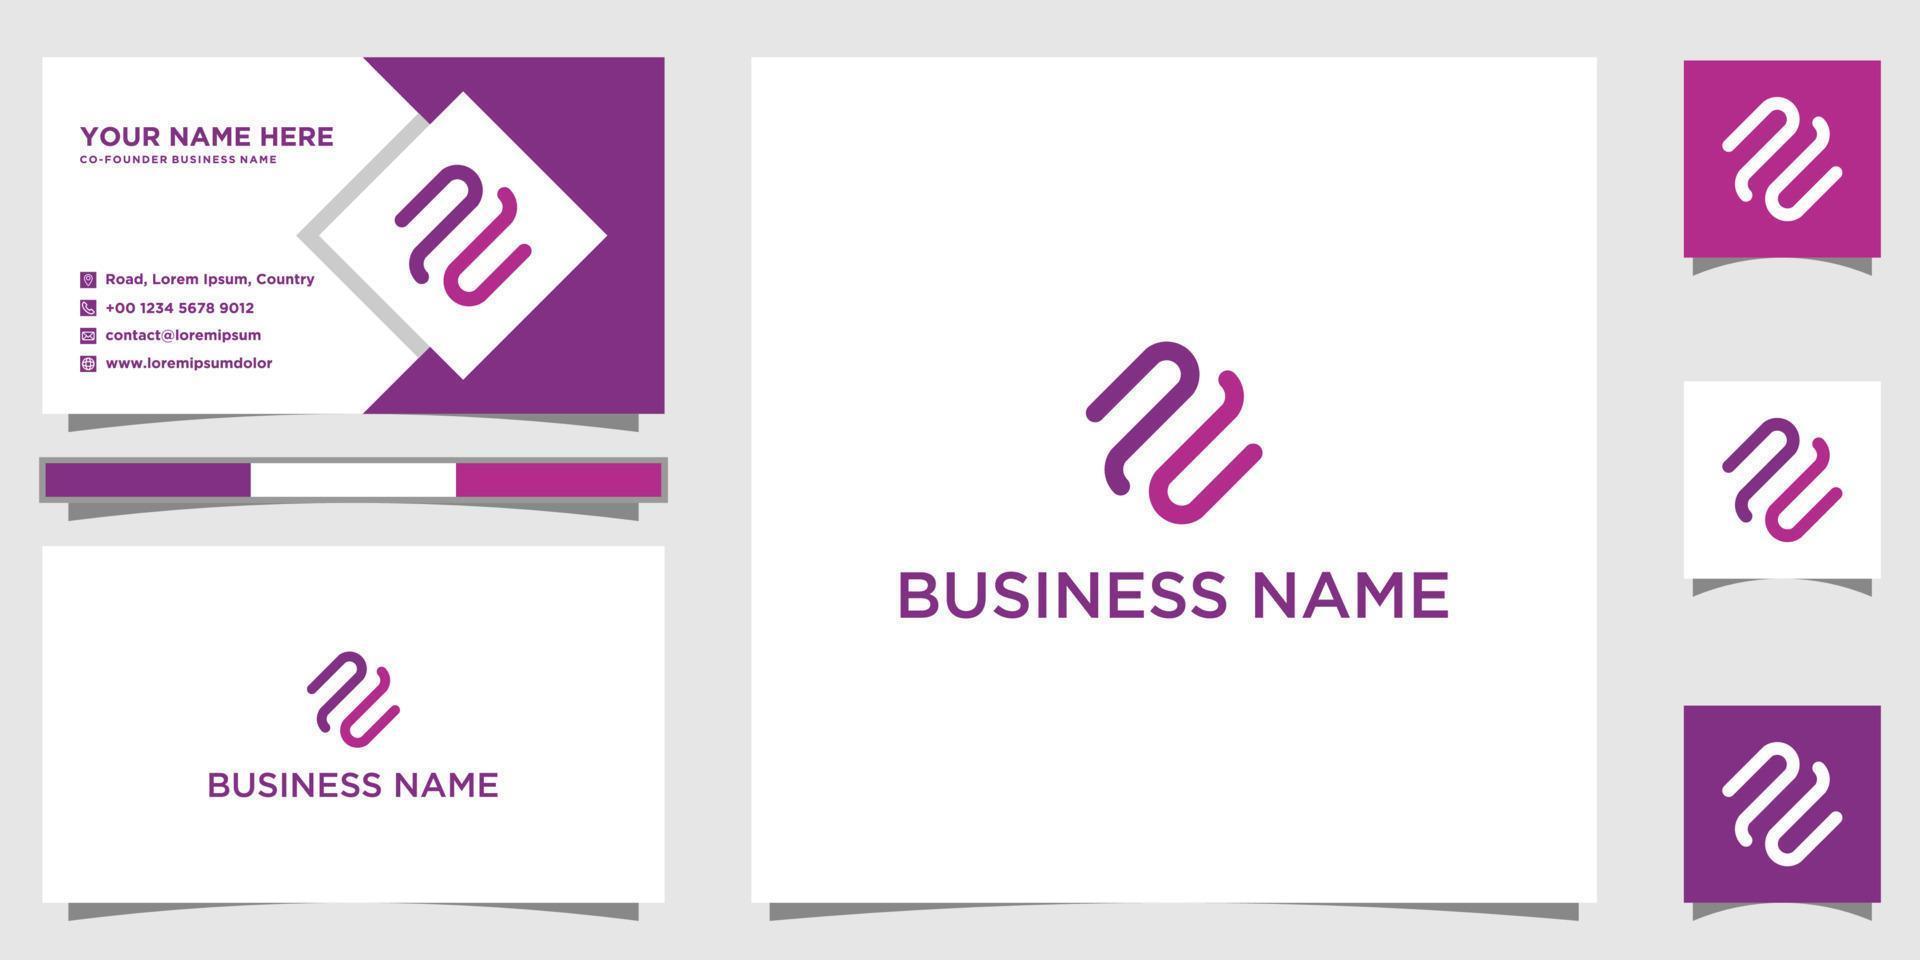 Letter pp monogram line creative modern simple logo design with business card template vector